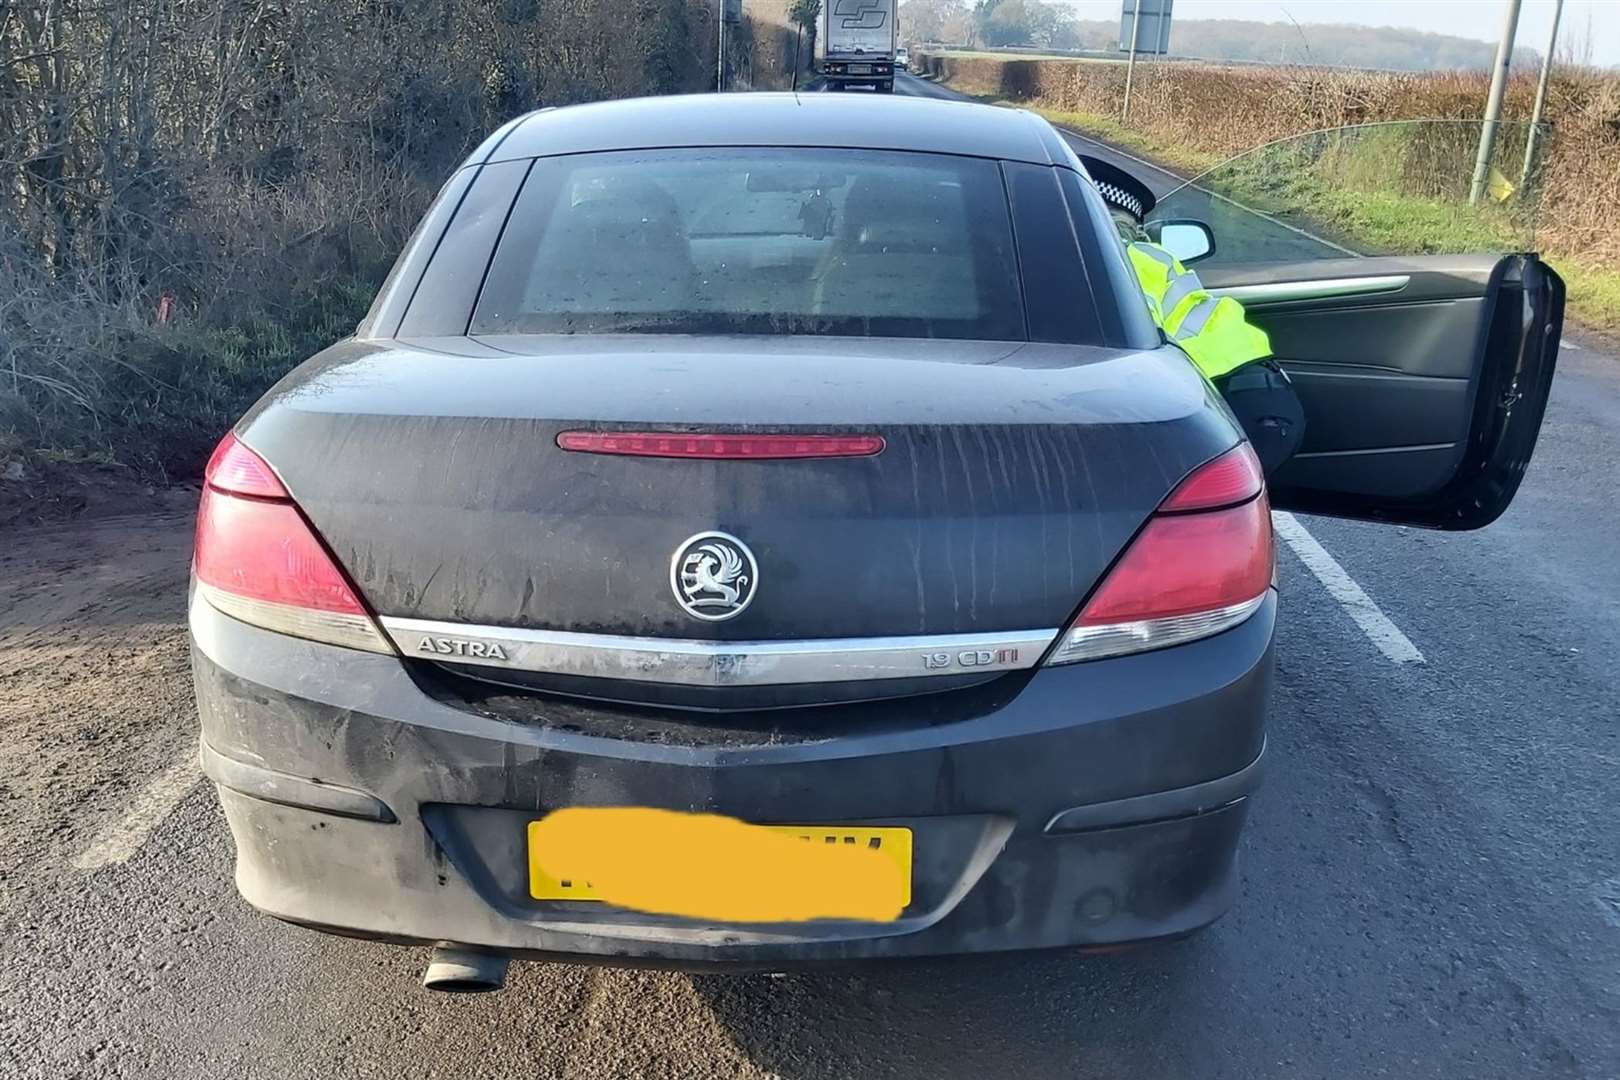 A learner driver failed a roadside drugs test on the A28 in Ashford. Photo: Kent Police